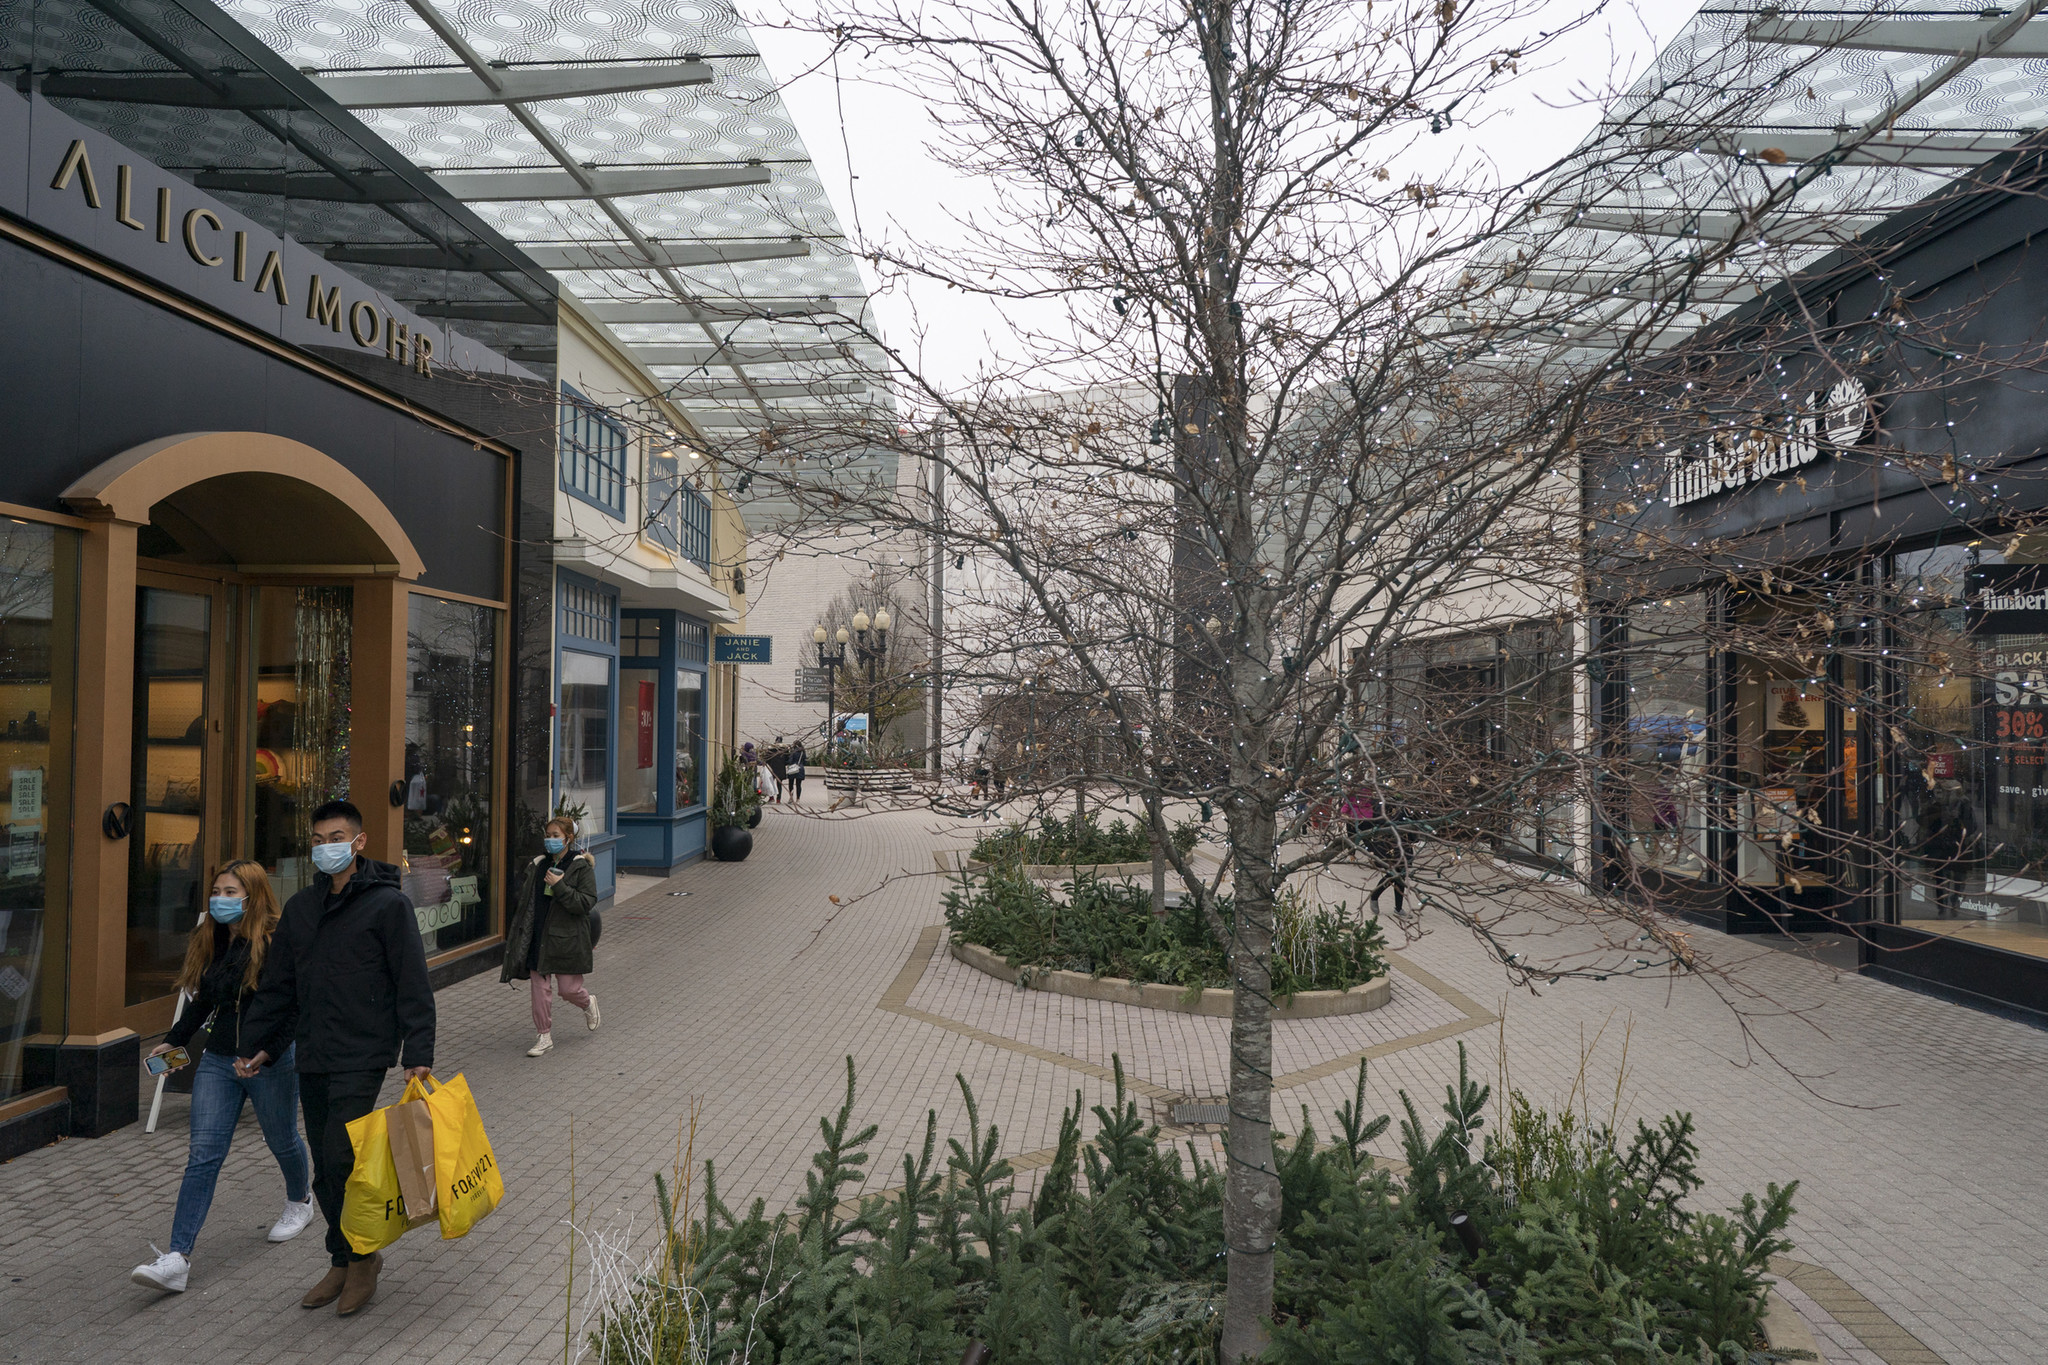 Skokie, IL votes to designate Westfield Old Orchard Mall as a